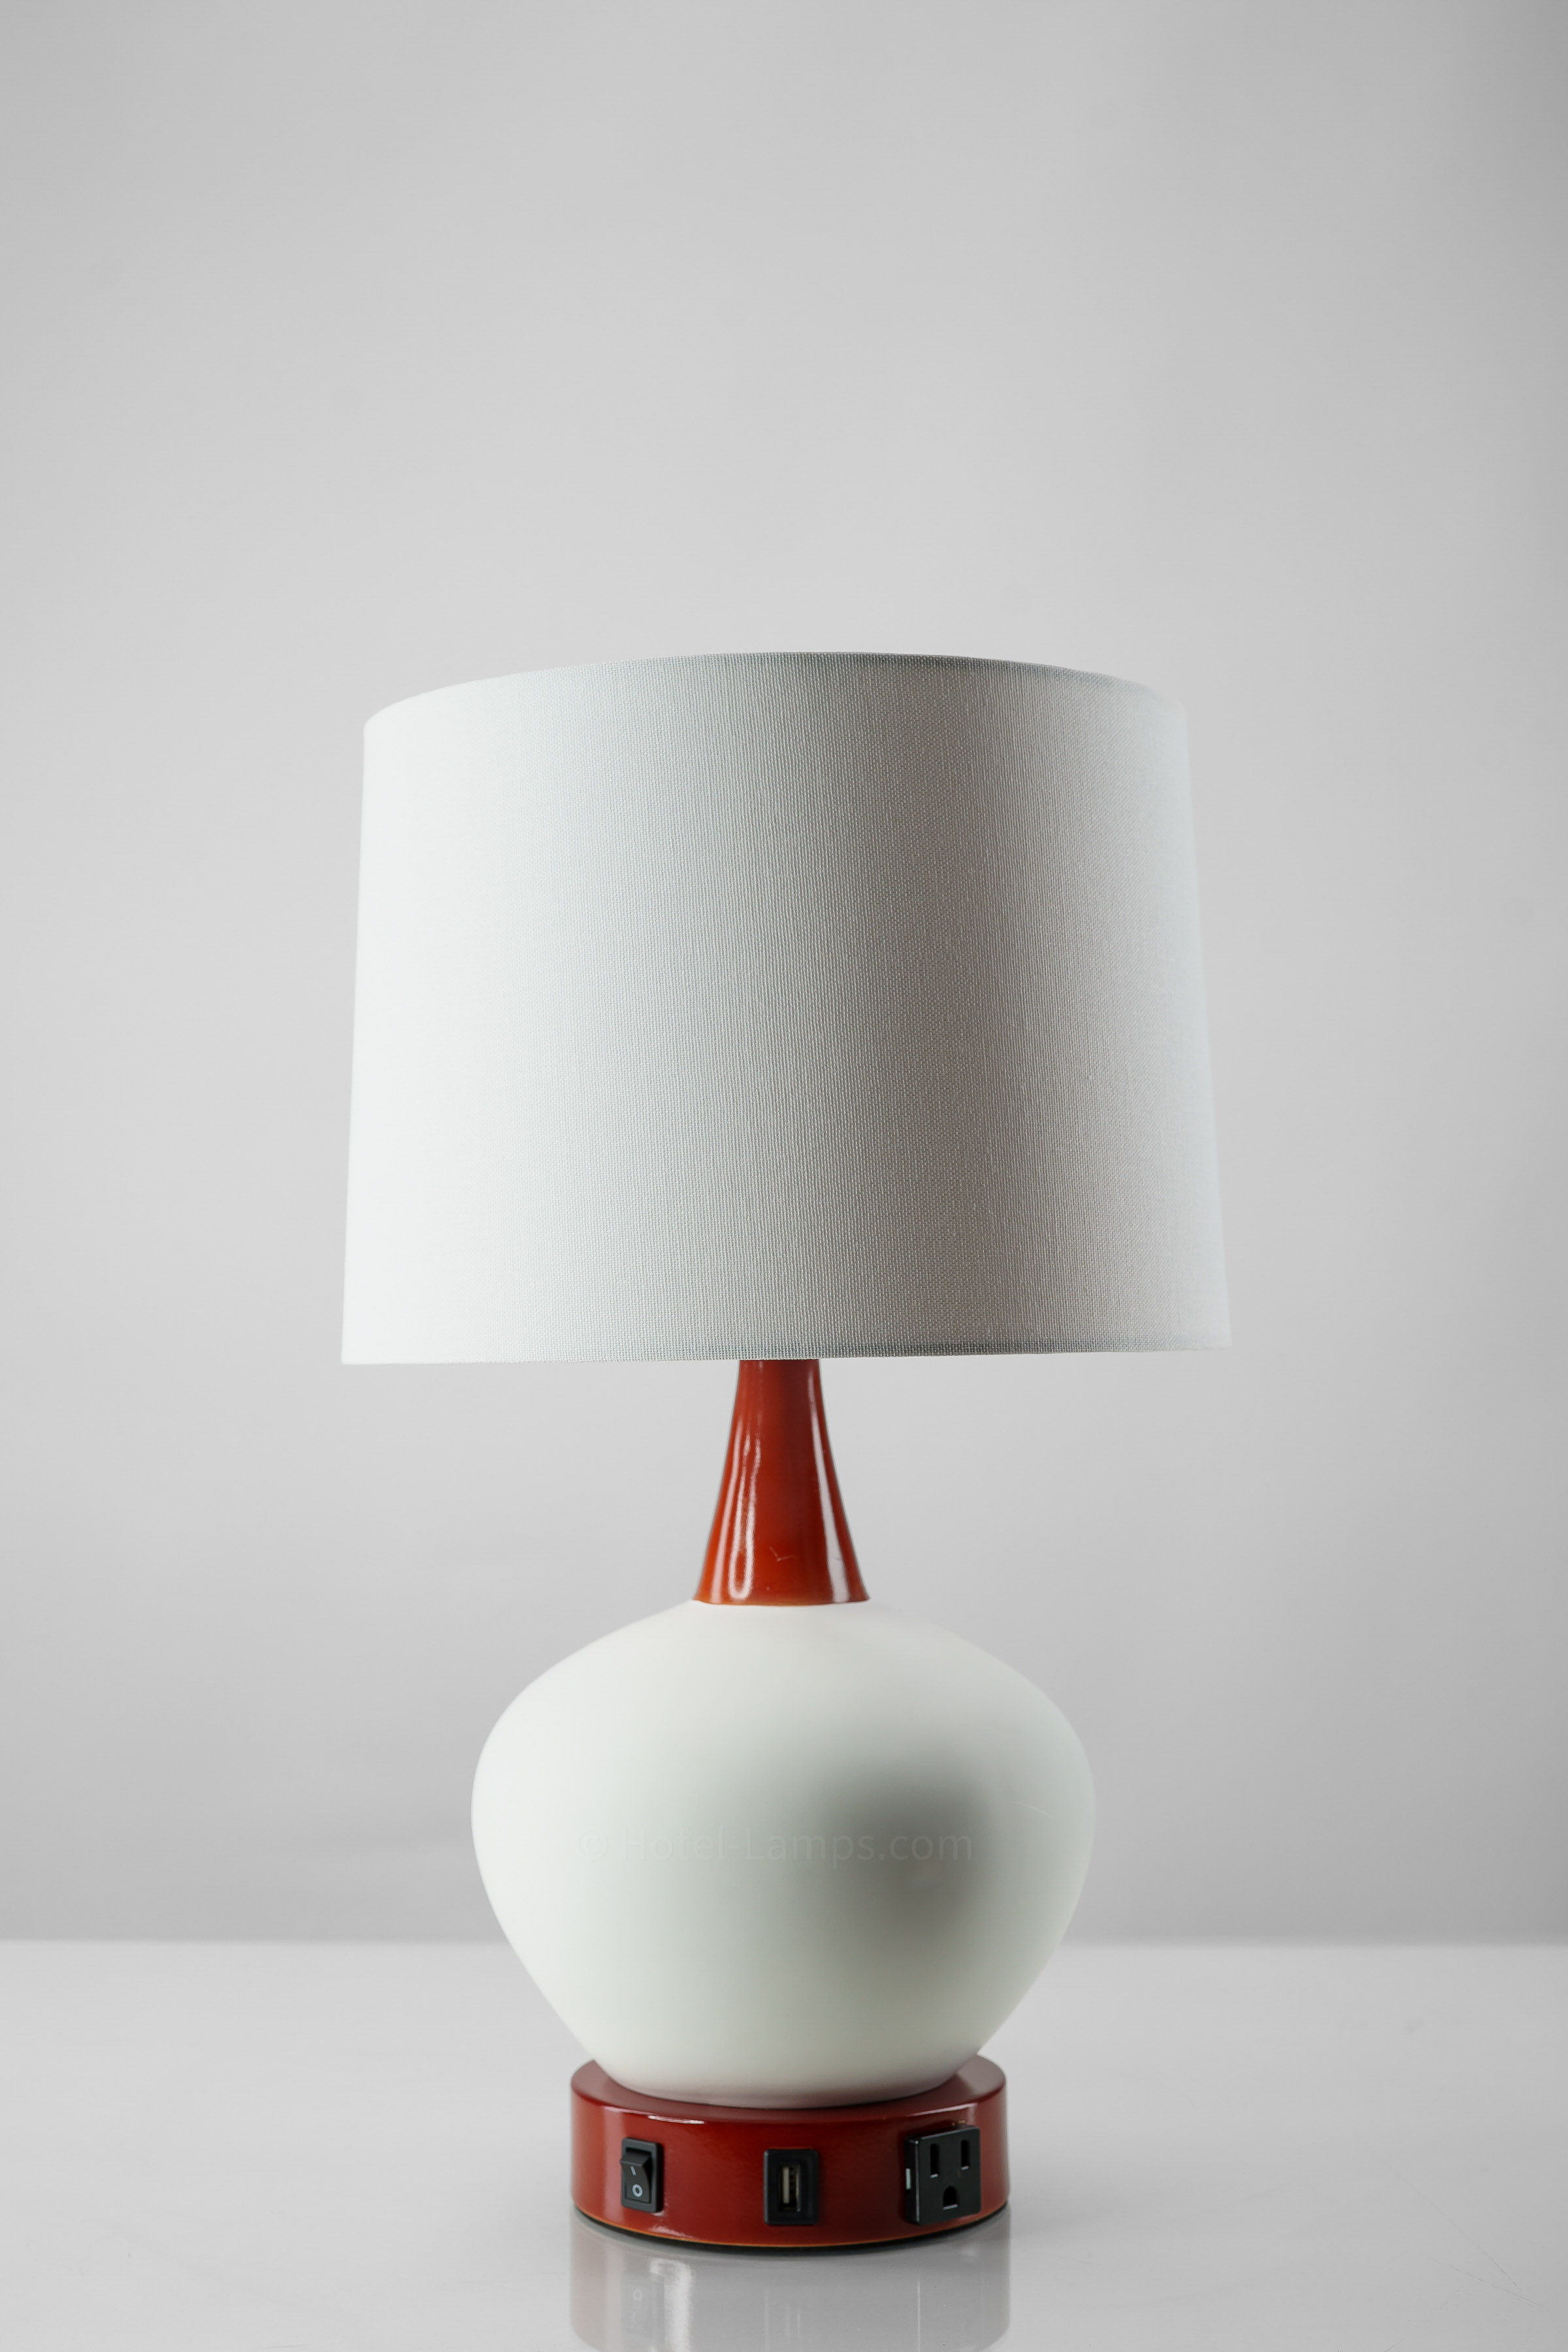 White Ceramic Sphere Table Lamp Red Accents